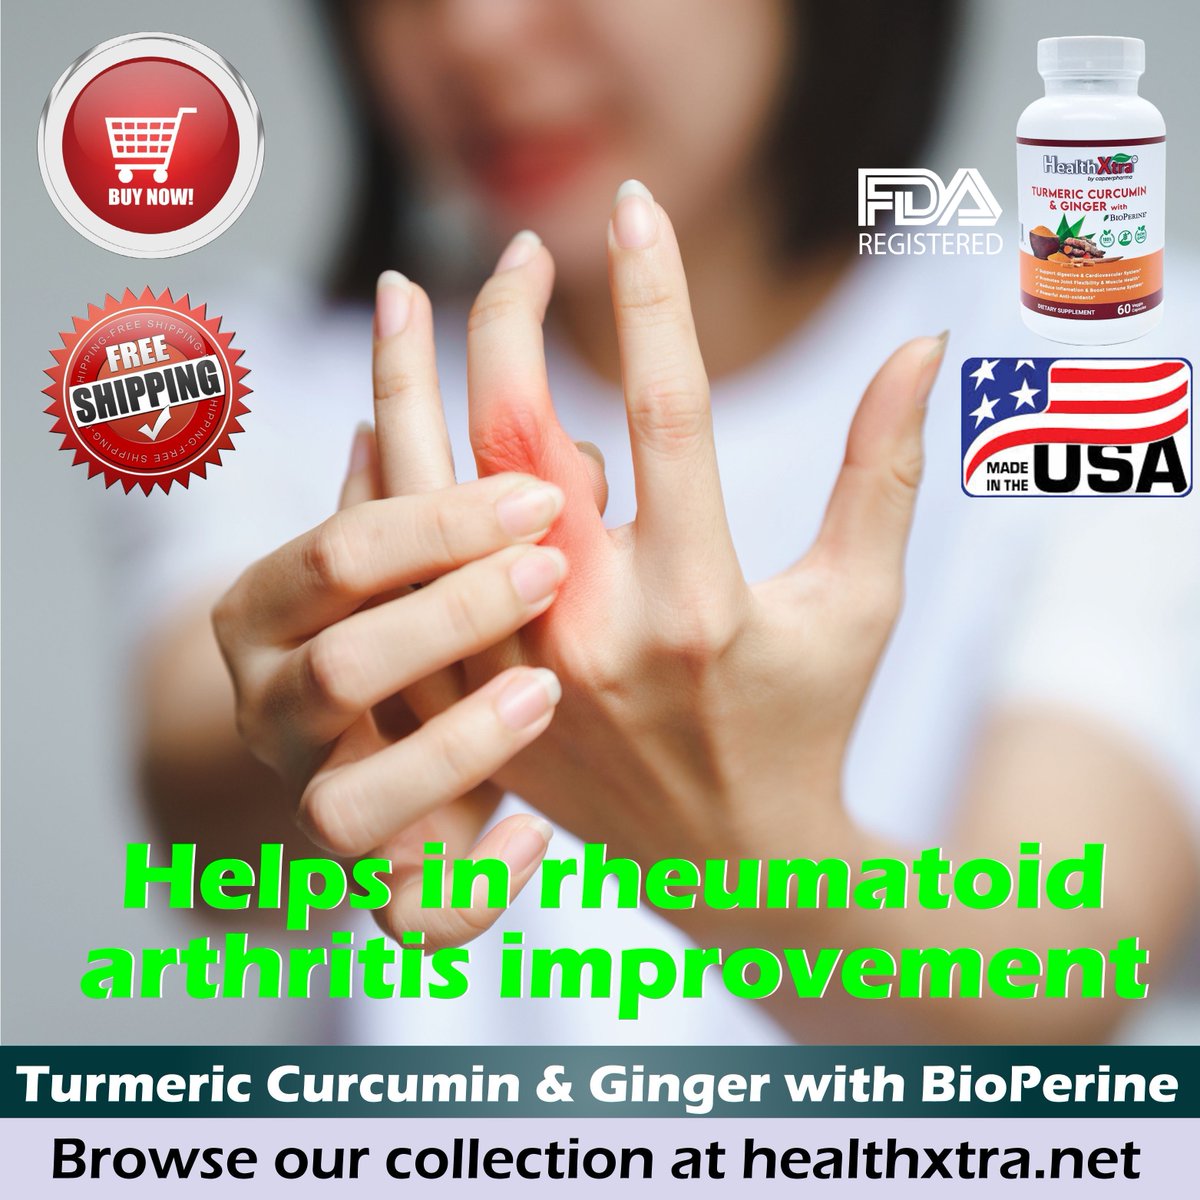 Browse our collection: healthxtra.net
Our products are available on ebay: ebay.com/str/healthxtra…
#turmeric
#turmericbenefits
#skincare
#bonehealth
#antiinflammatory
#brainhealth
#digestionsupport
#cardiovascularhealth
#diabetic
#metabolismbooster
#immunebooster